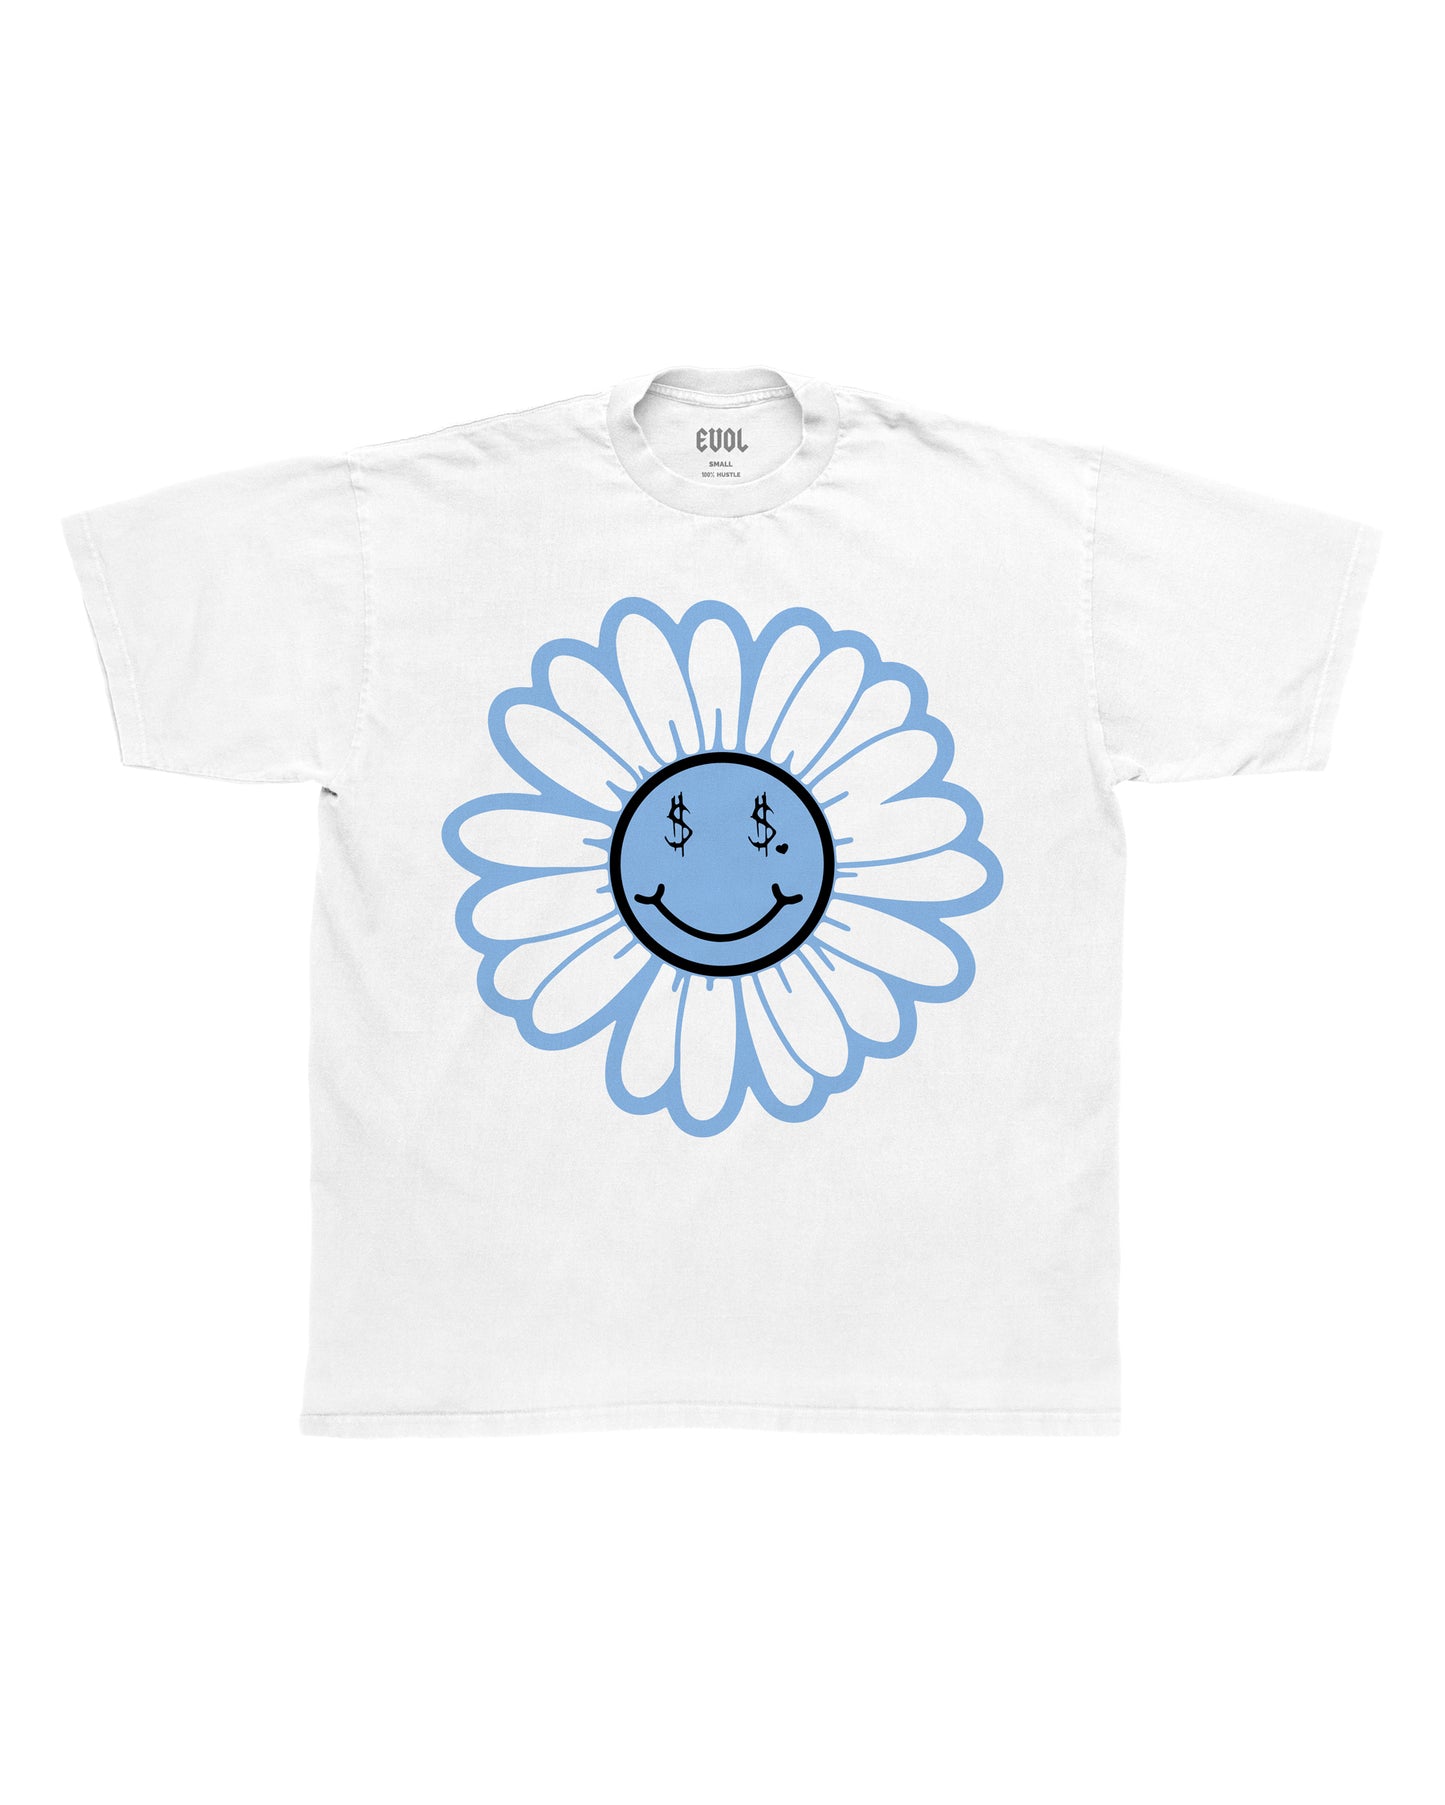 EVOL Peace Shirt White  And Baby Blue